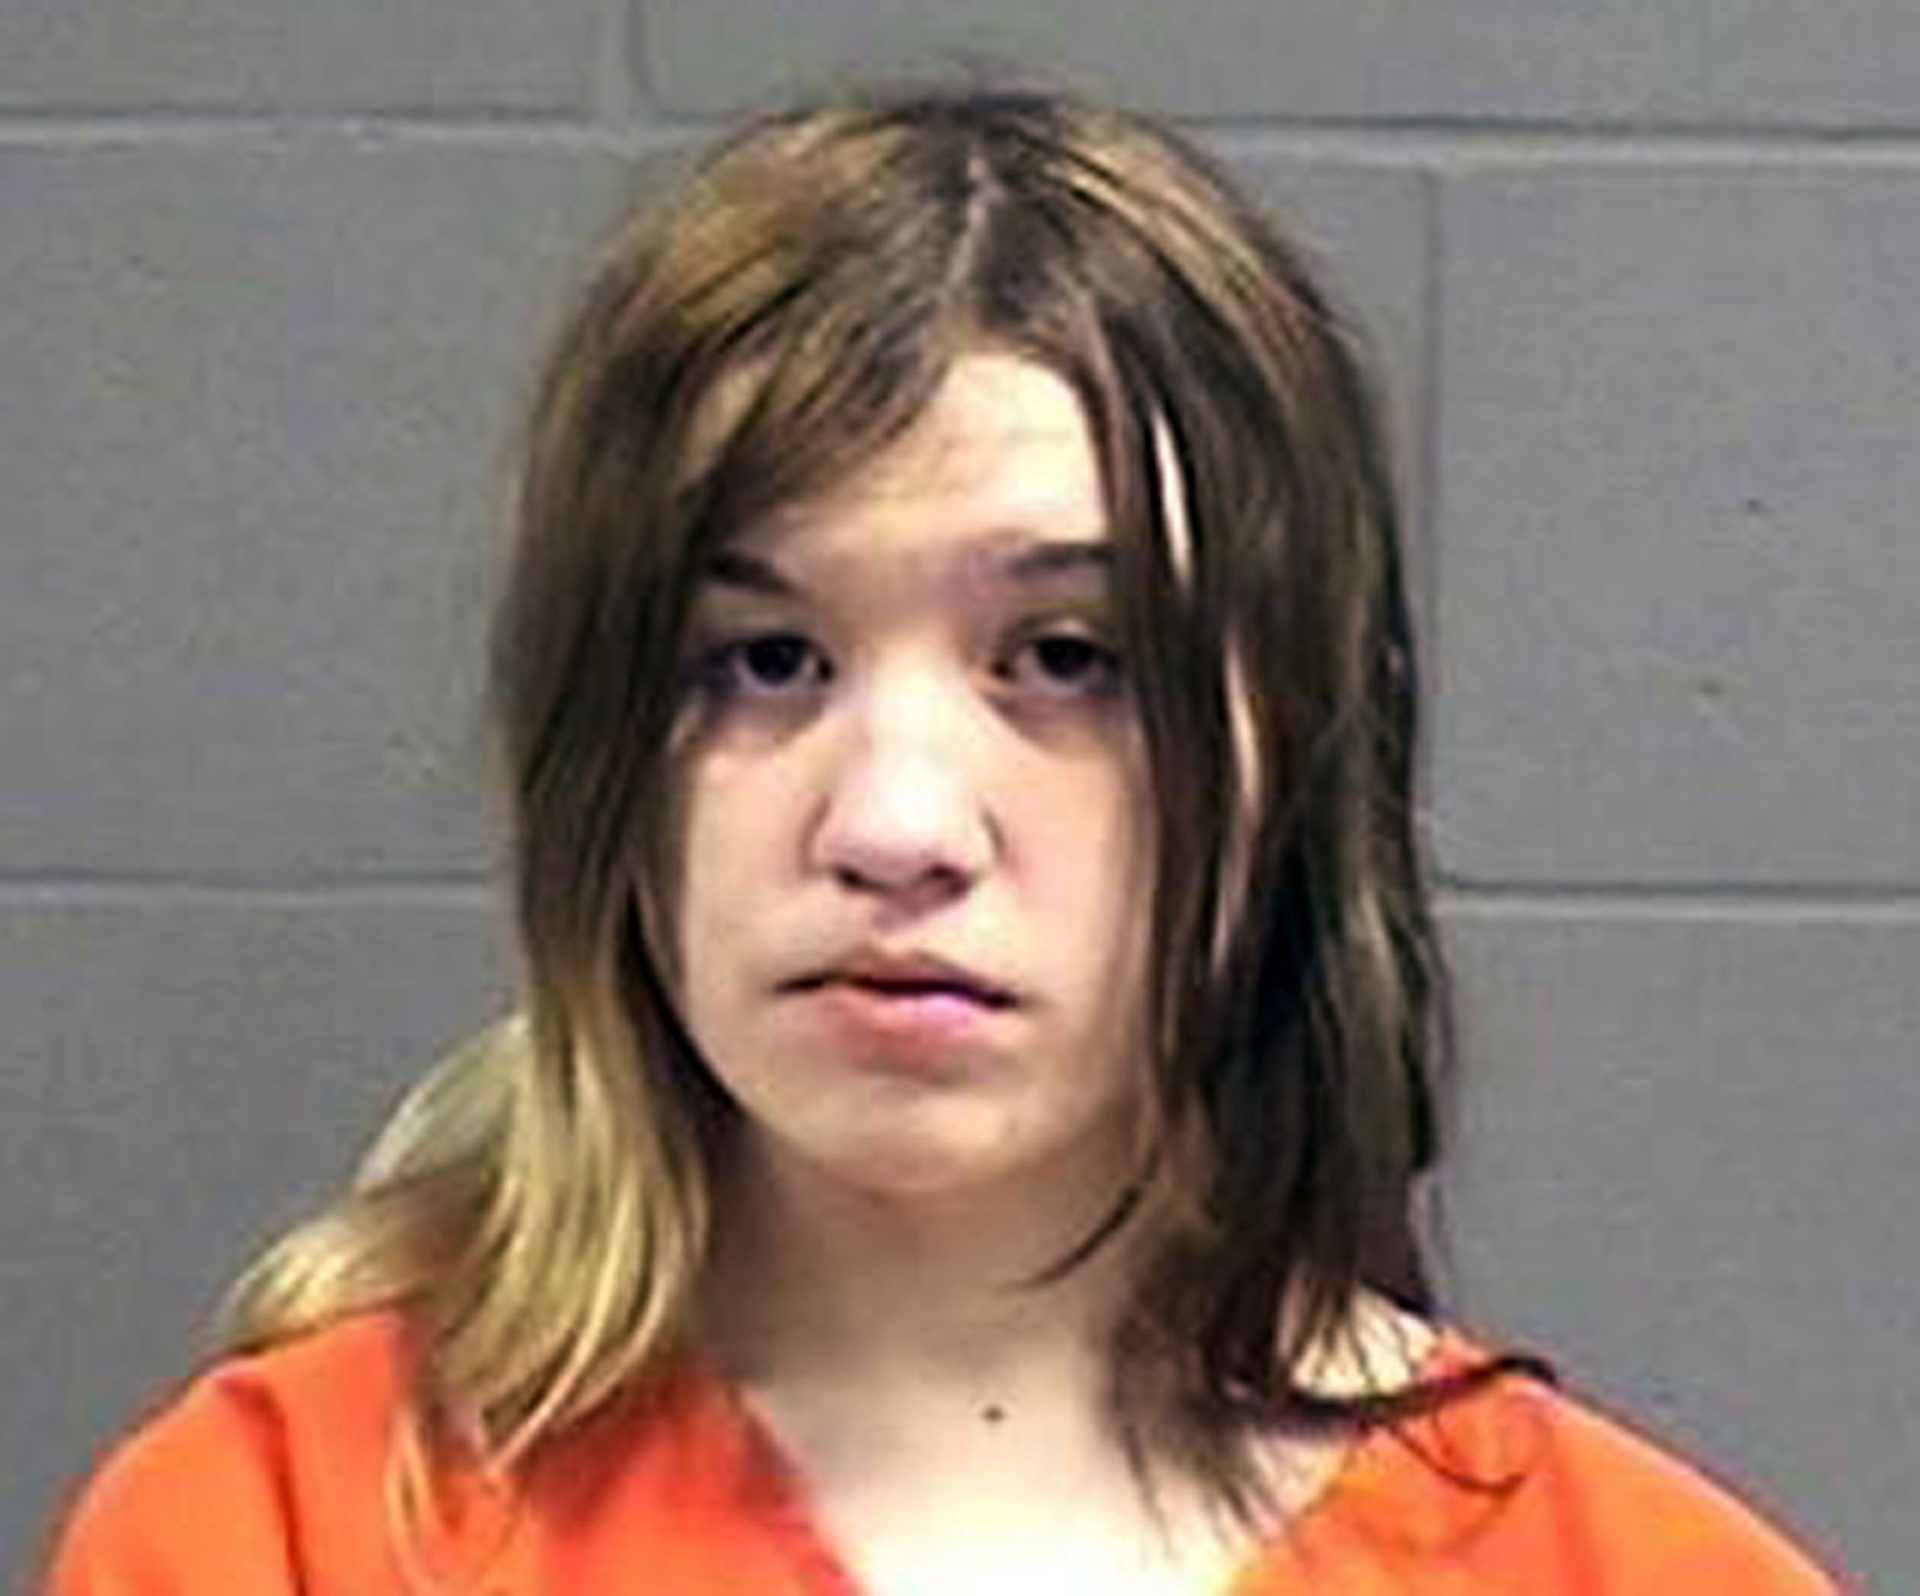 FILE - This photo provided Friday, April 24, 2014 by the Oneida County, Wisconsin, Sheriff's Office shows Ashlee Martinson. Martinson accused of killing her mother and stepfather, has pleaded guilty in a deal that has prosecutors recommending a 40-year prison sentence. Martinson entered her plea on Friday, March 11, 2016 to two counts of second-degree homicide. The 18-year-old was accused of killing the couple at the family's home in the Town of Piehl, Wis. (Oneida County Sheriffâ€™s Office via AP, File)